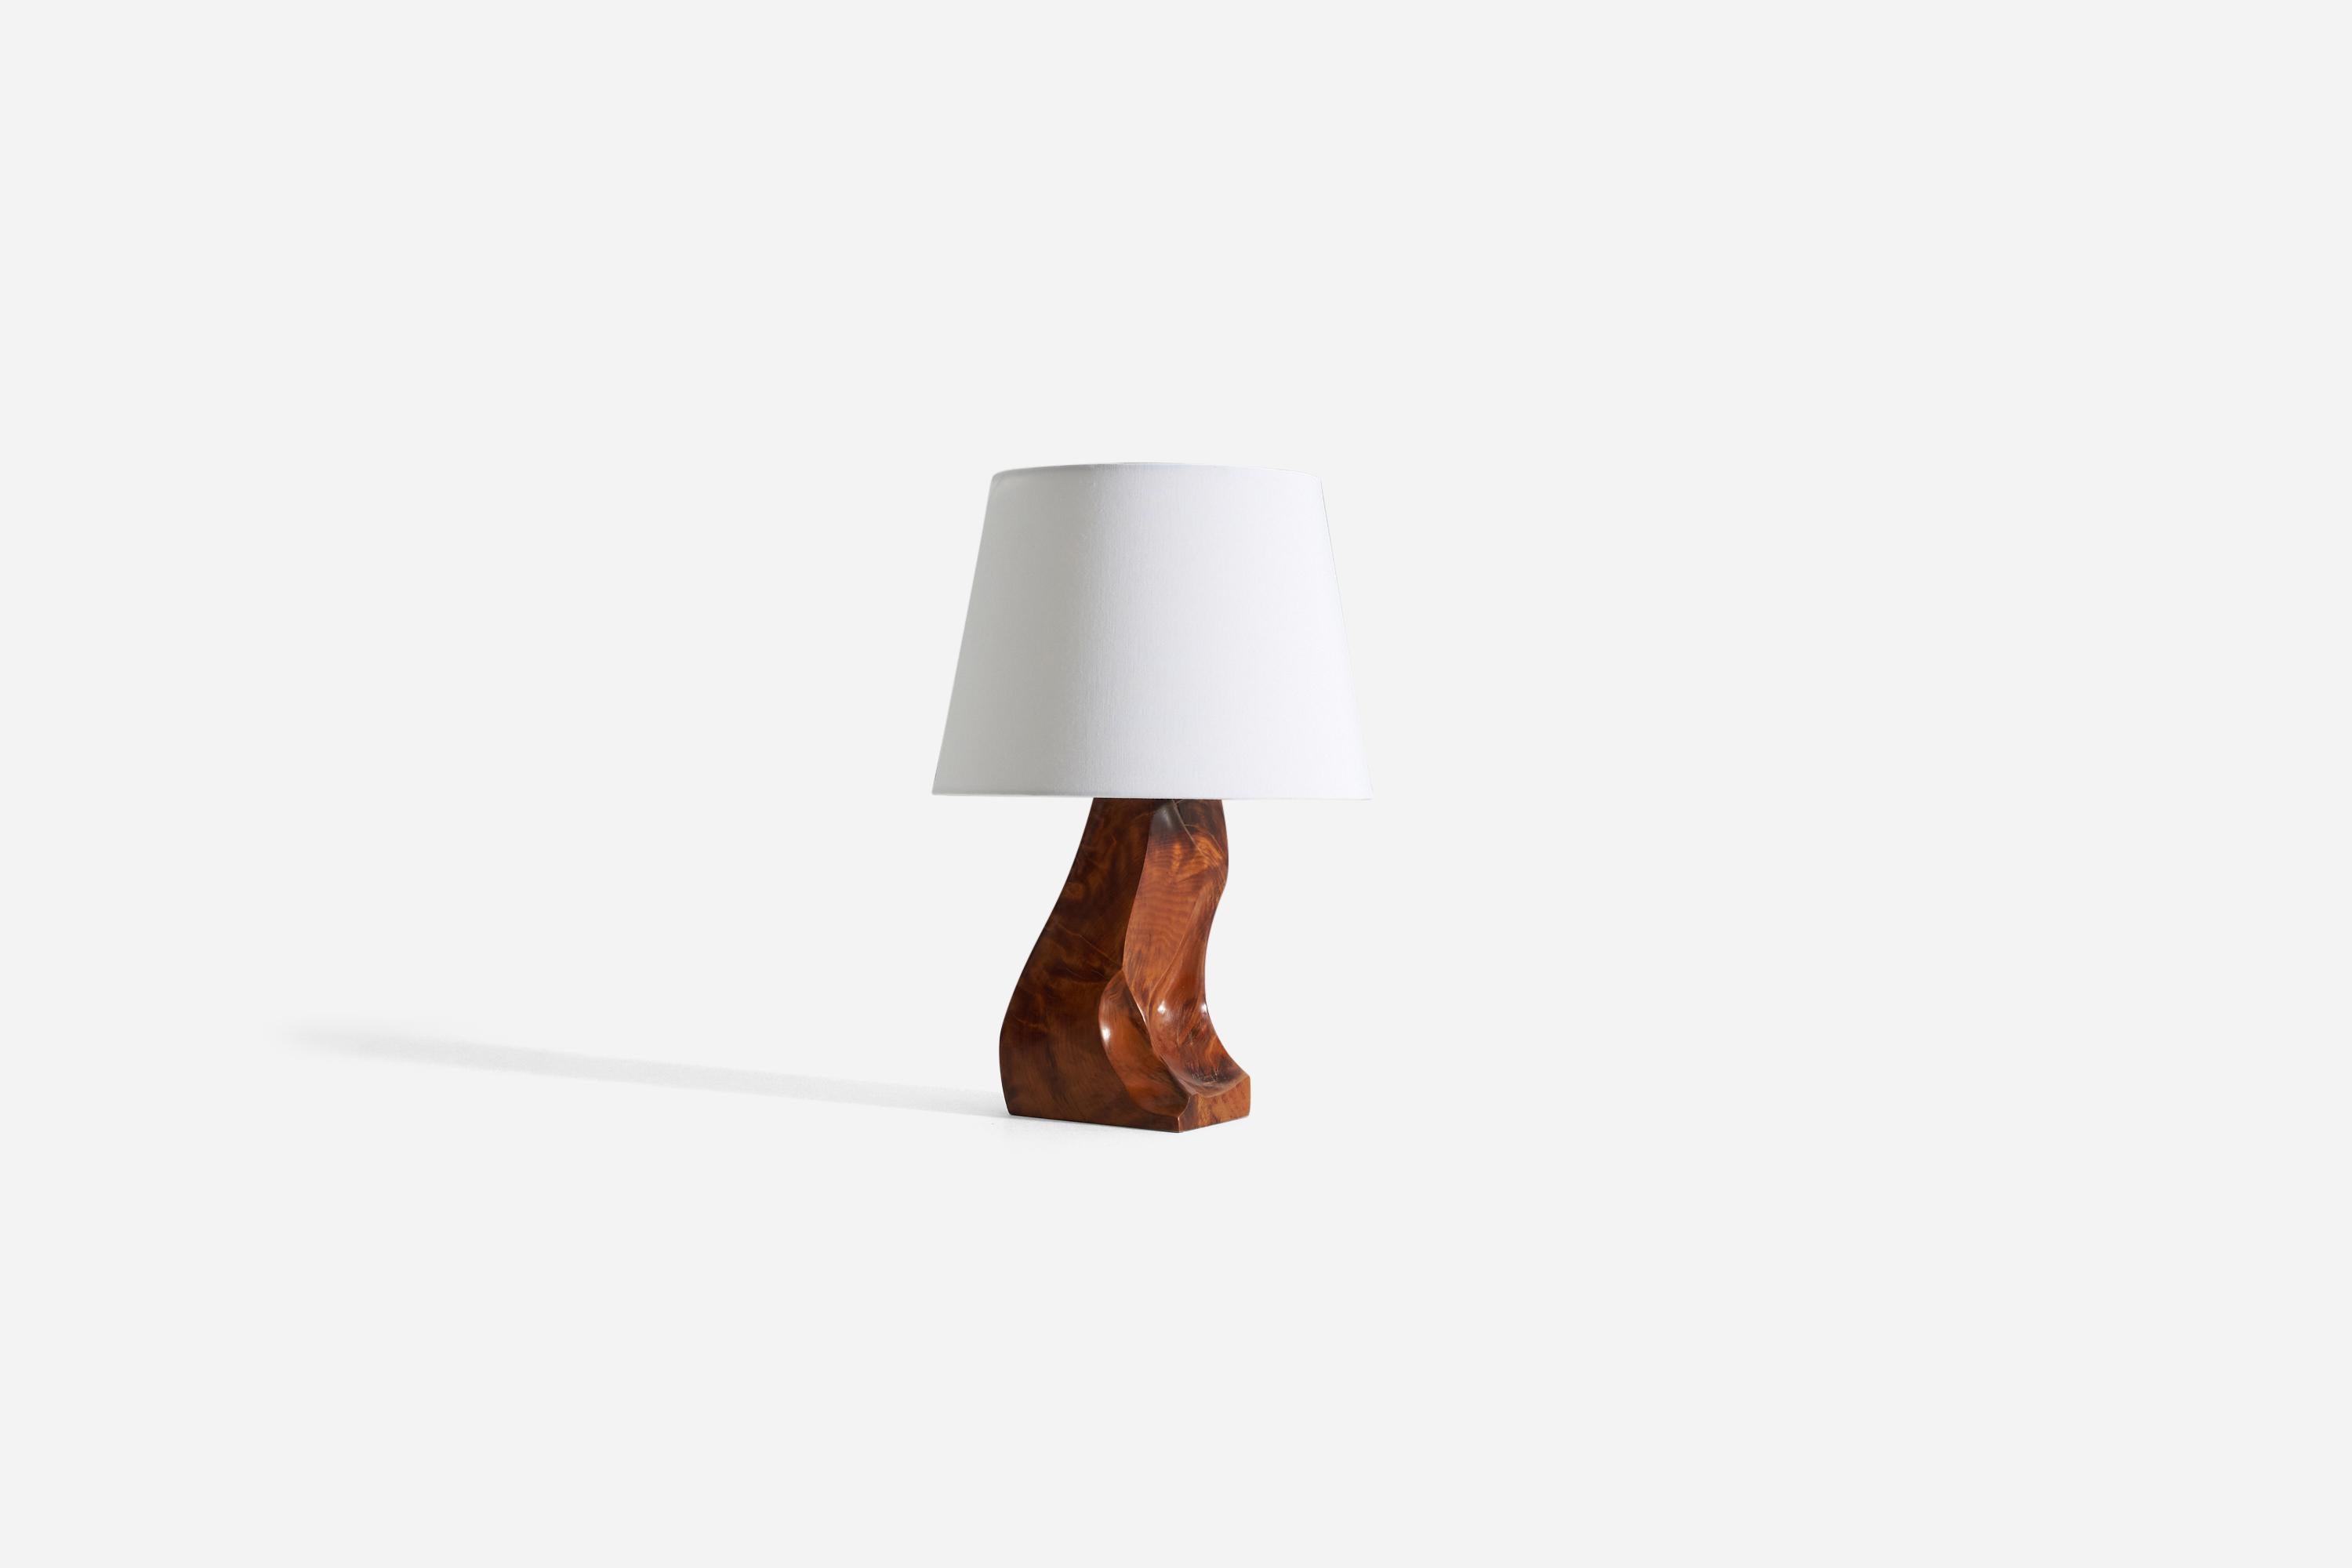 A freeform wooden table lamp. Designed and produced in Sweden, 1970s.

Sold without lampshade. Dimensions in listing exclude shade.
For reference:
Dimensions of lamp with shade H 17.5” / W 12”
Dimensions of shade- top of shade diameter 9” /